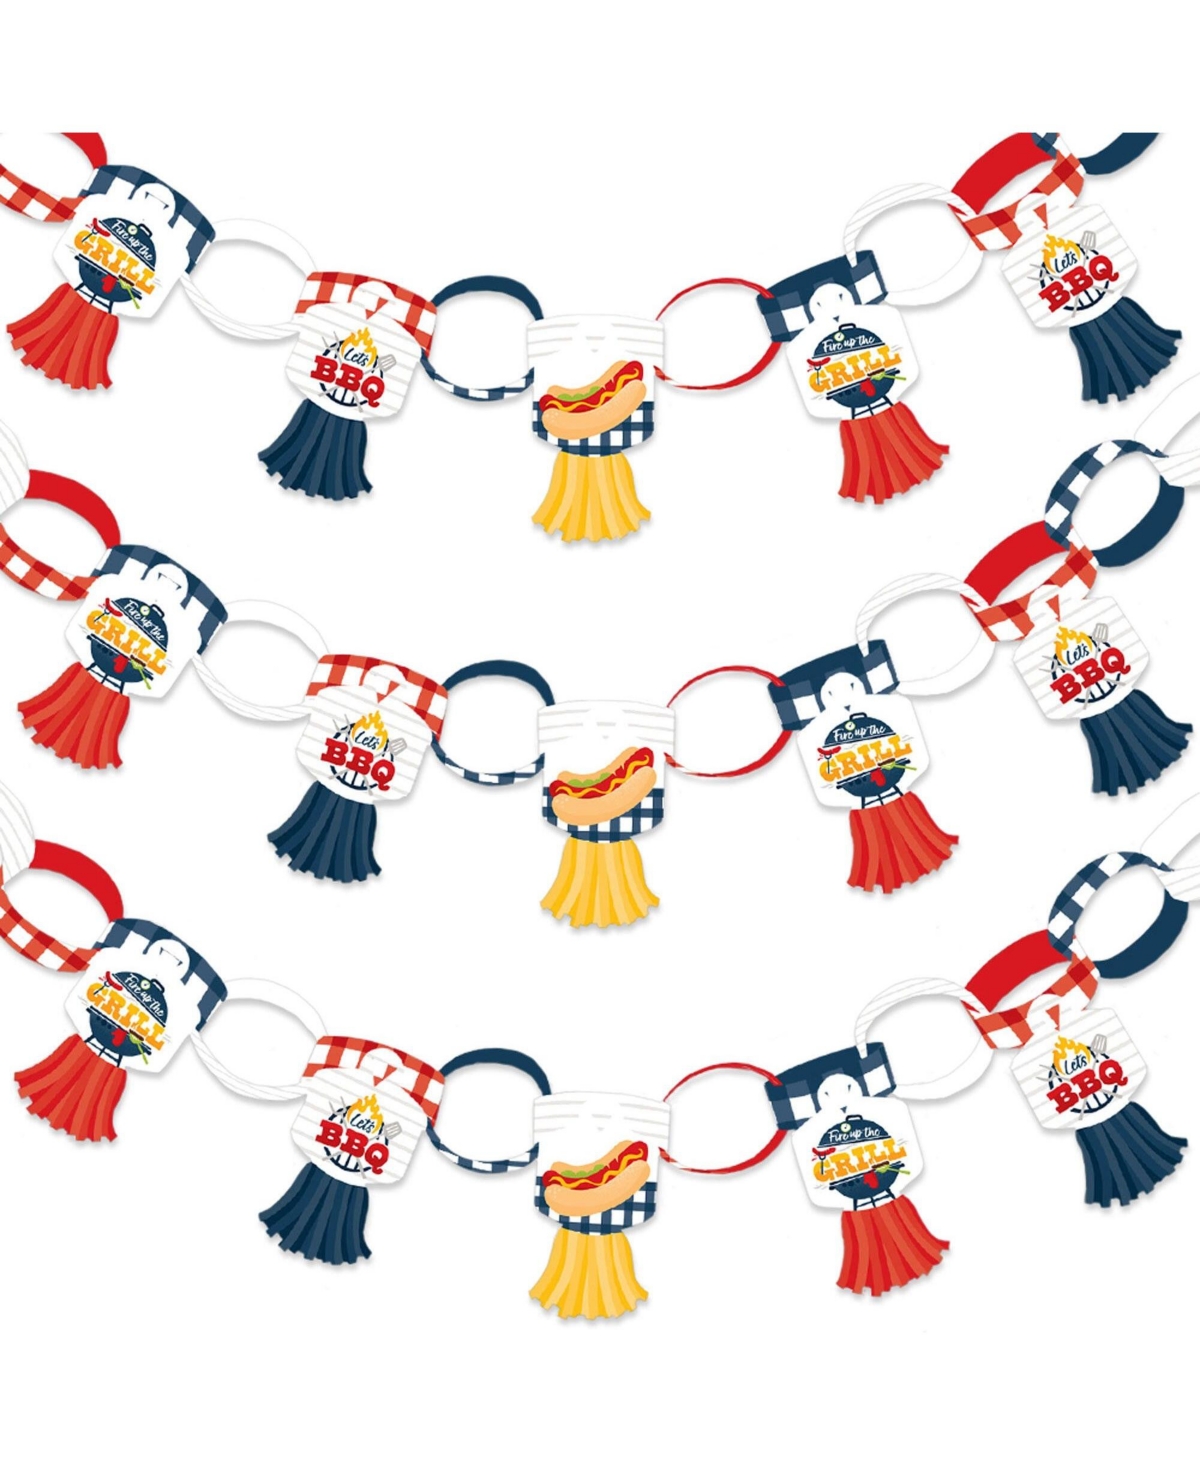 Fire Up the Grill - 90 Links & 30 Tassels Bbq Picnic Paper Chains Garland 21 ft